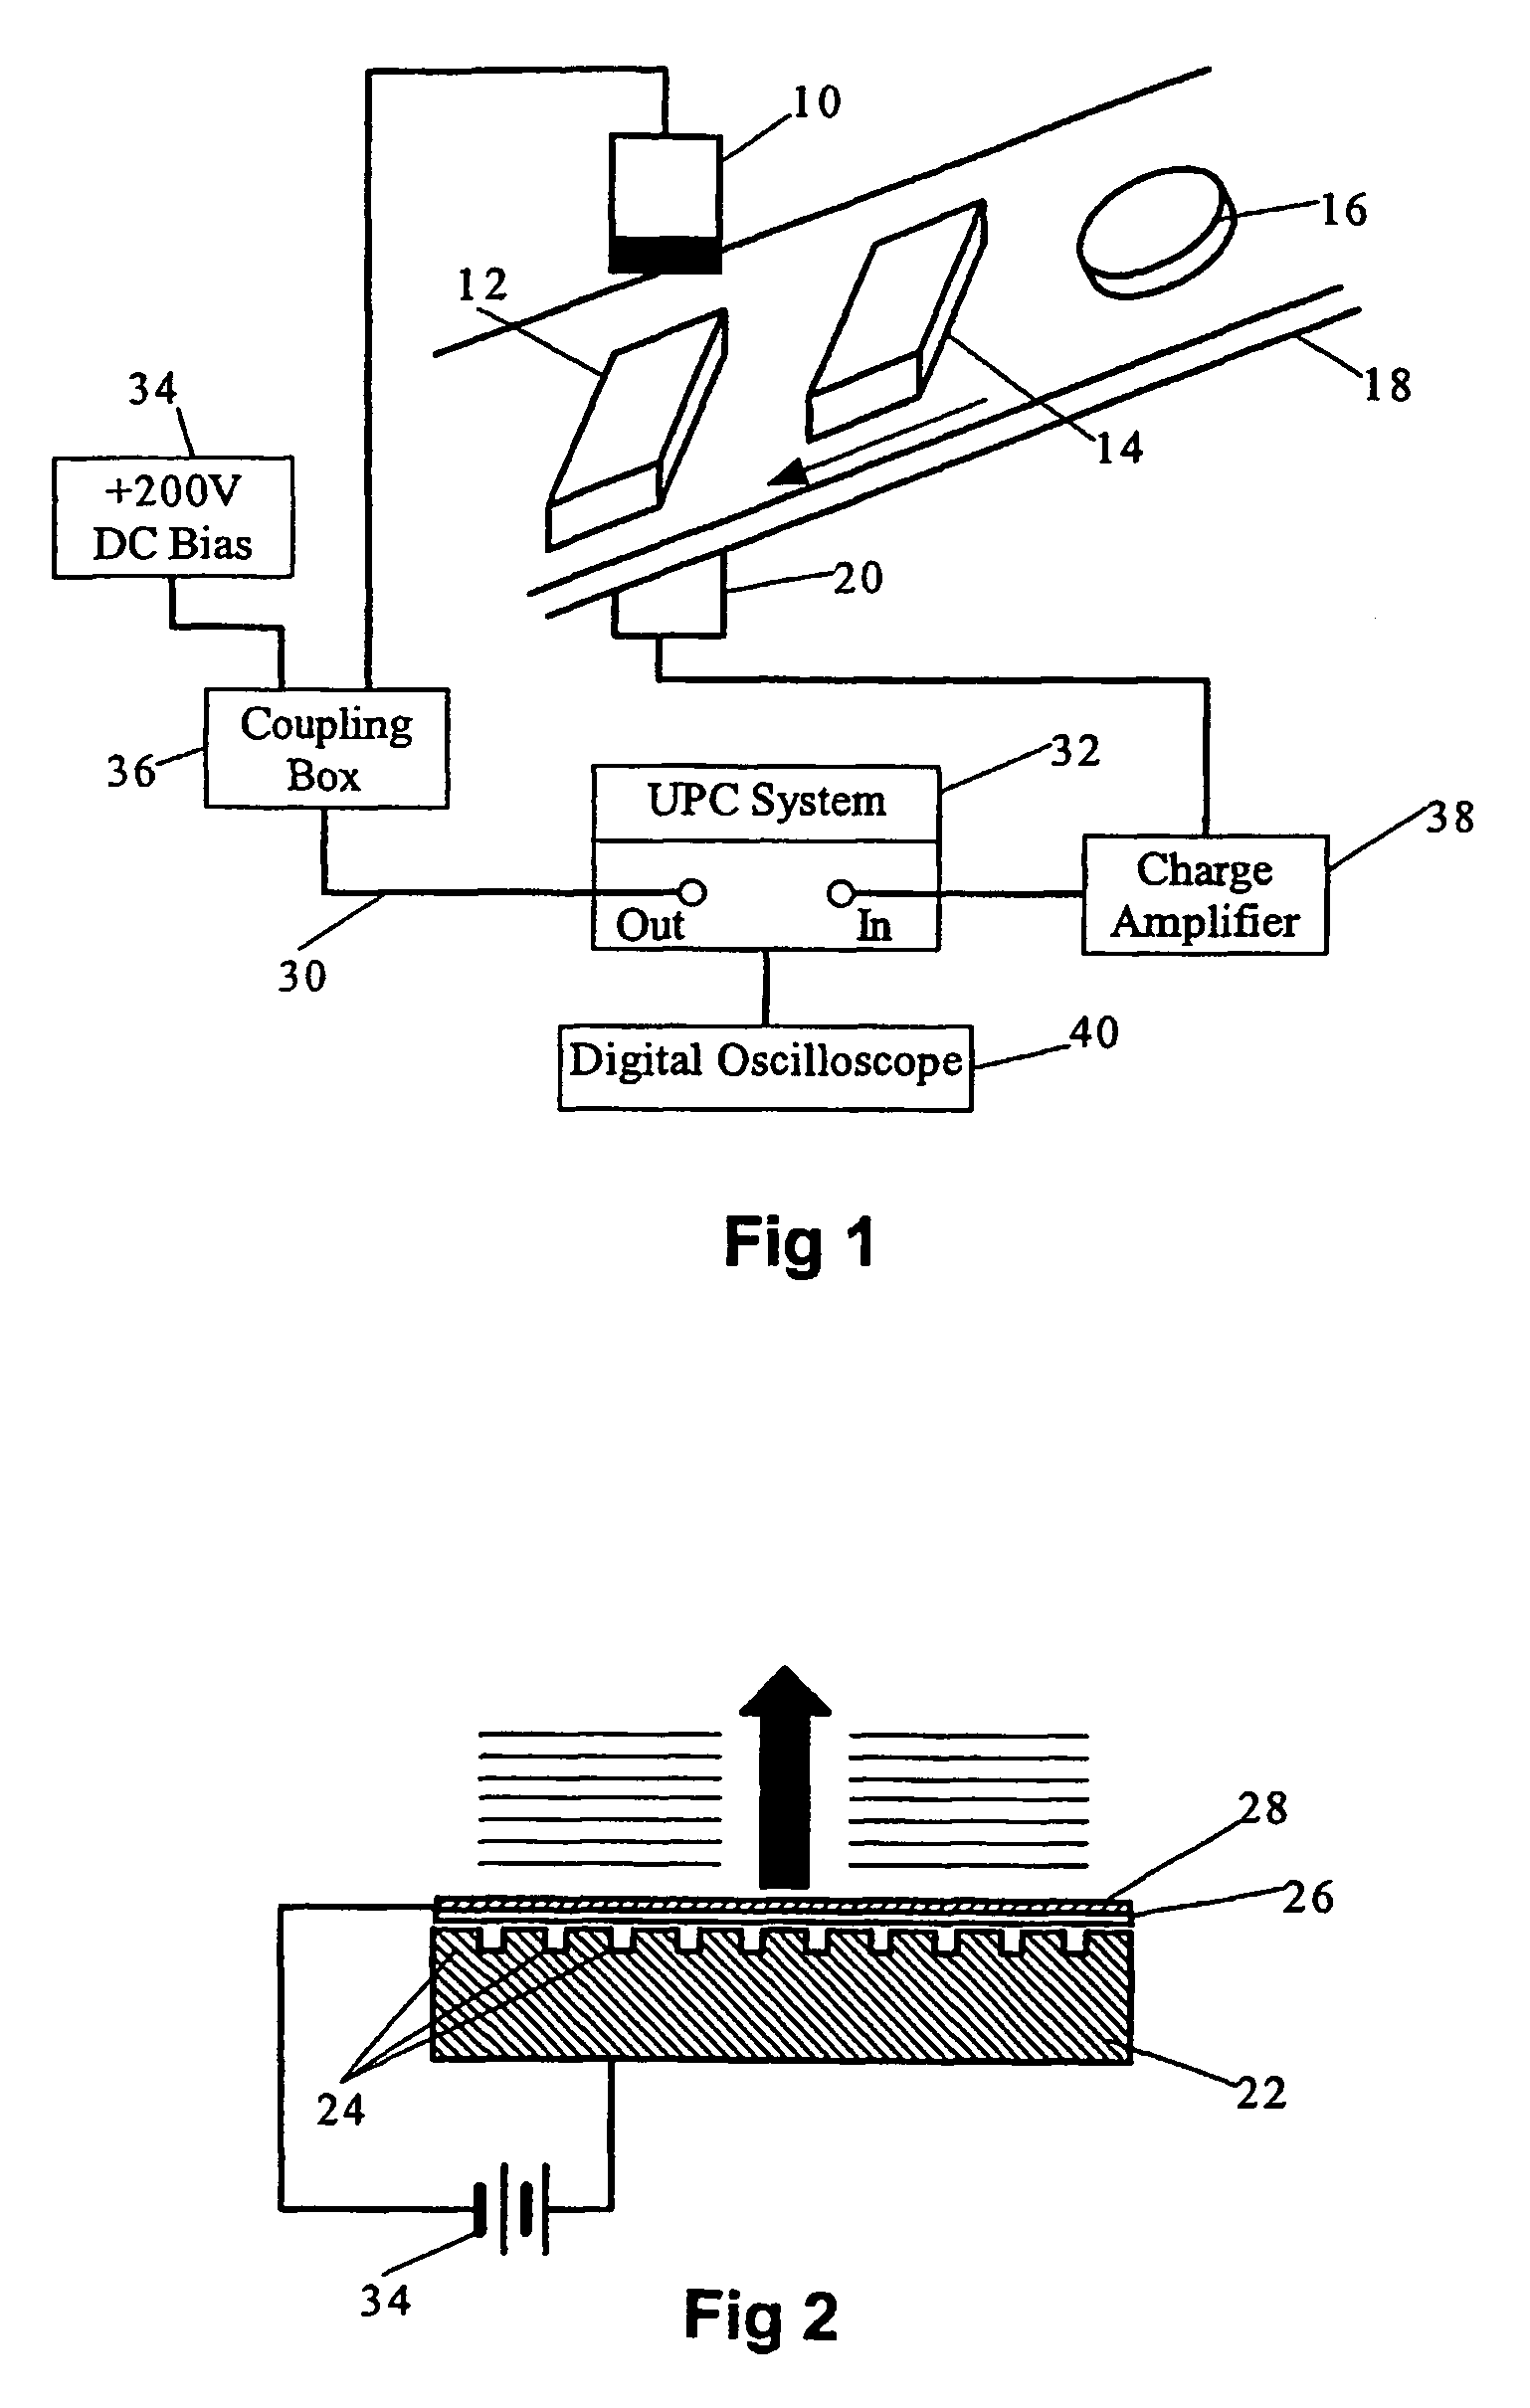 Method of inspecting food stuffs and/or associated packaging